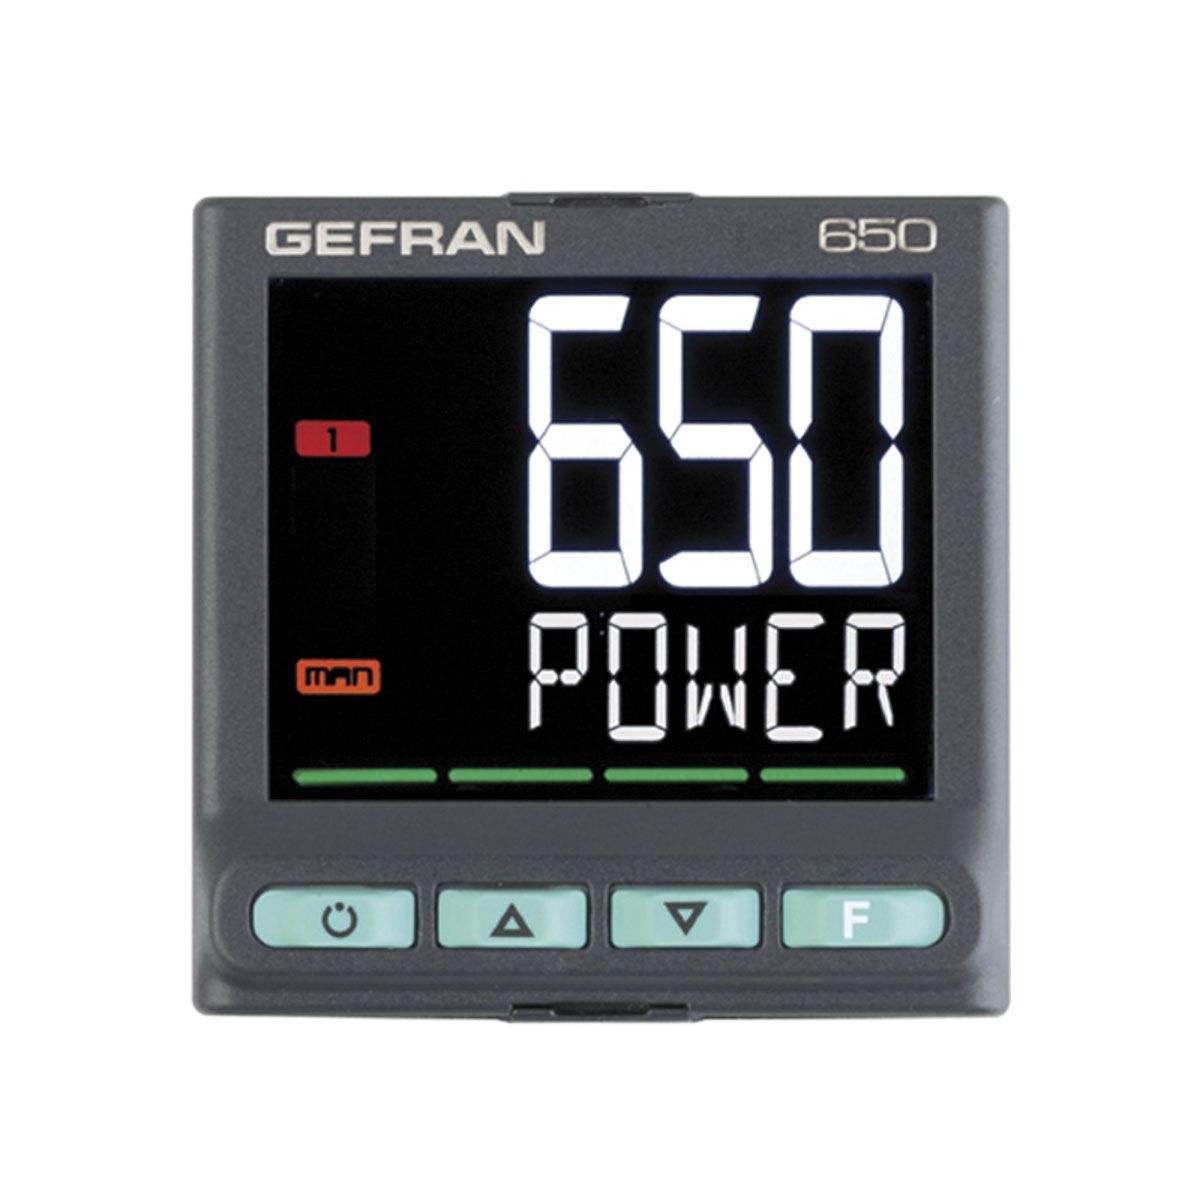 Gefran 650 PID Temperature Controller, 48 x 48mm, 3 Output Logic, Relay, 100 → 240 V ac Supply Voltage